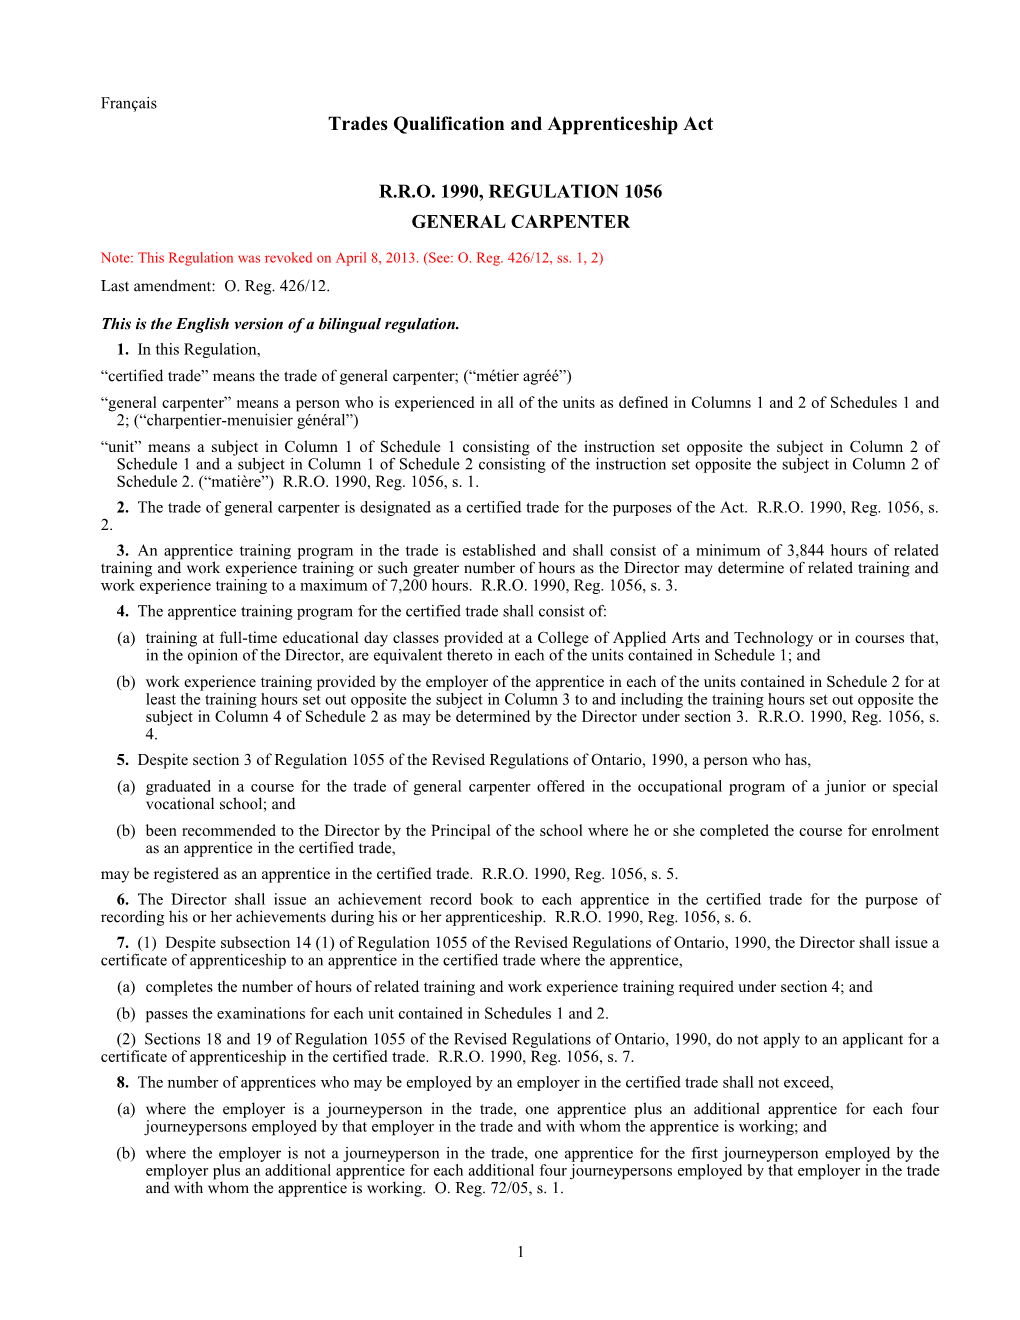 Trades Qualification and Apprenticeship Act - R.R.O. 1990, Reg. 1056